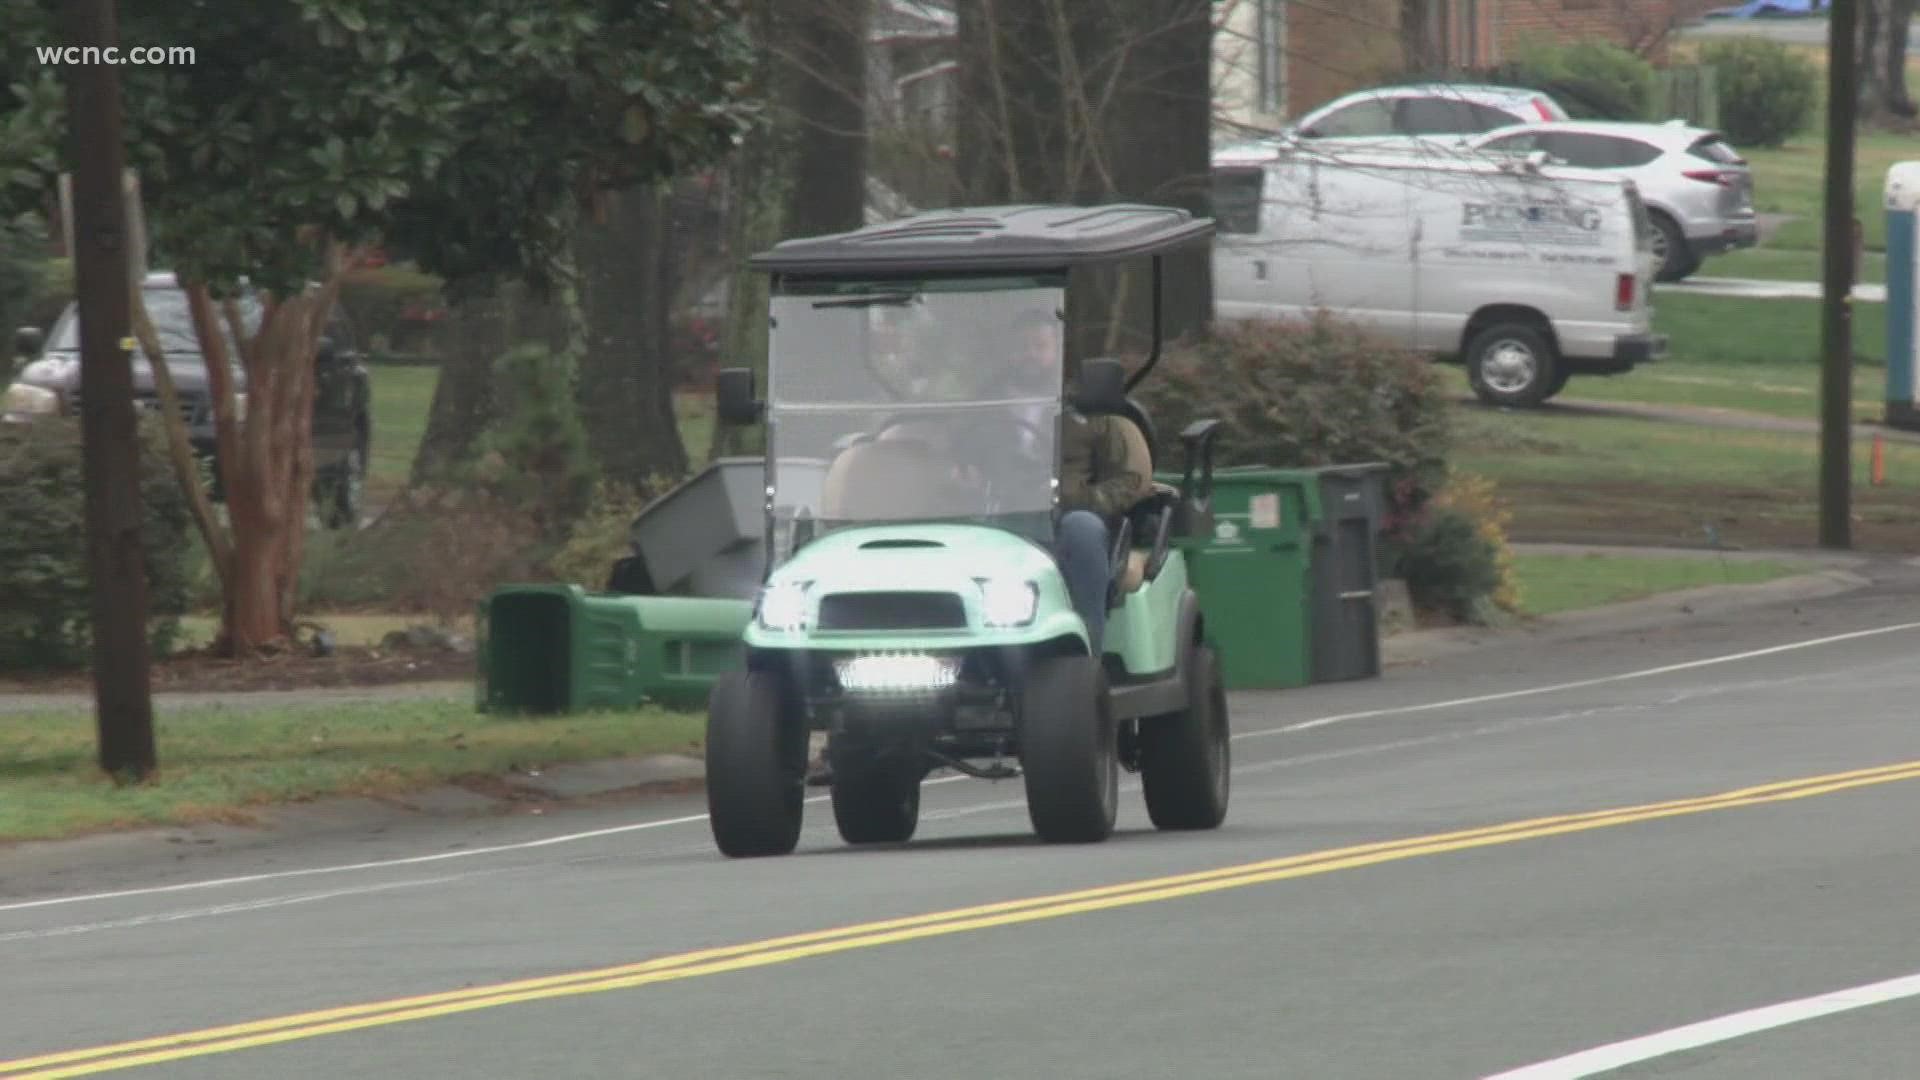 Can golf carts drive on public roads in Charlotte? | wcnc.com